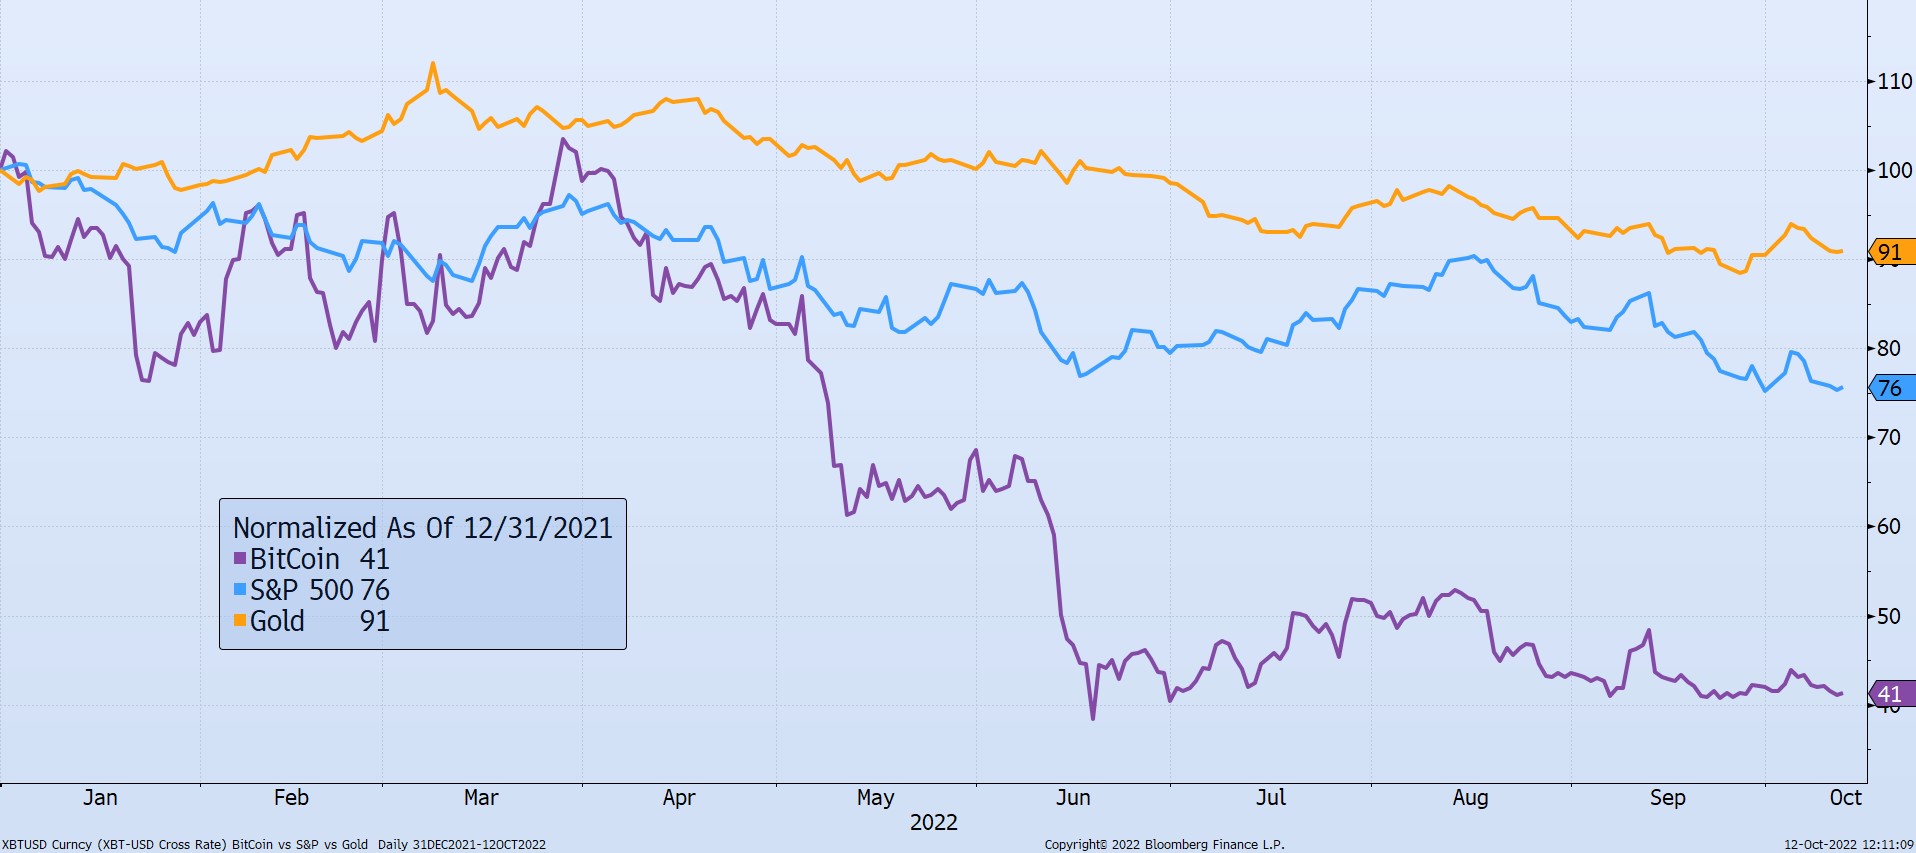 Orange for gold at $91, blue for the S&P 500 at $82, and purple for Bitcoin at $41